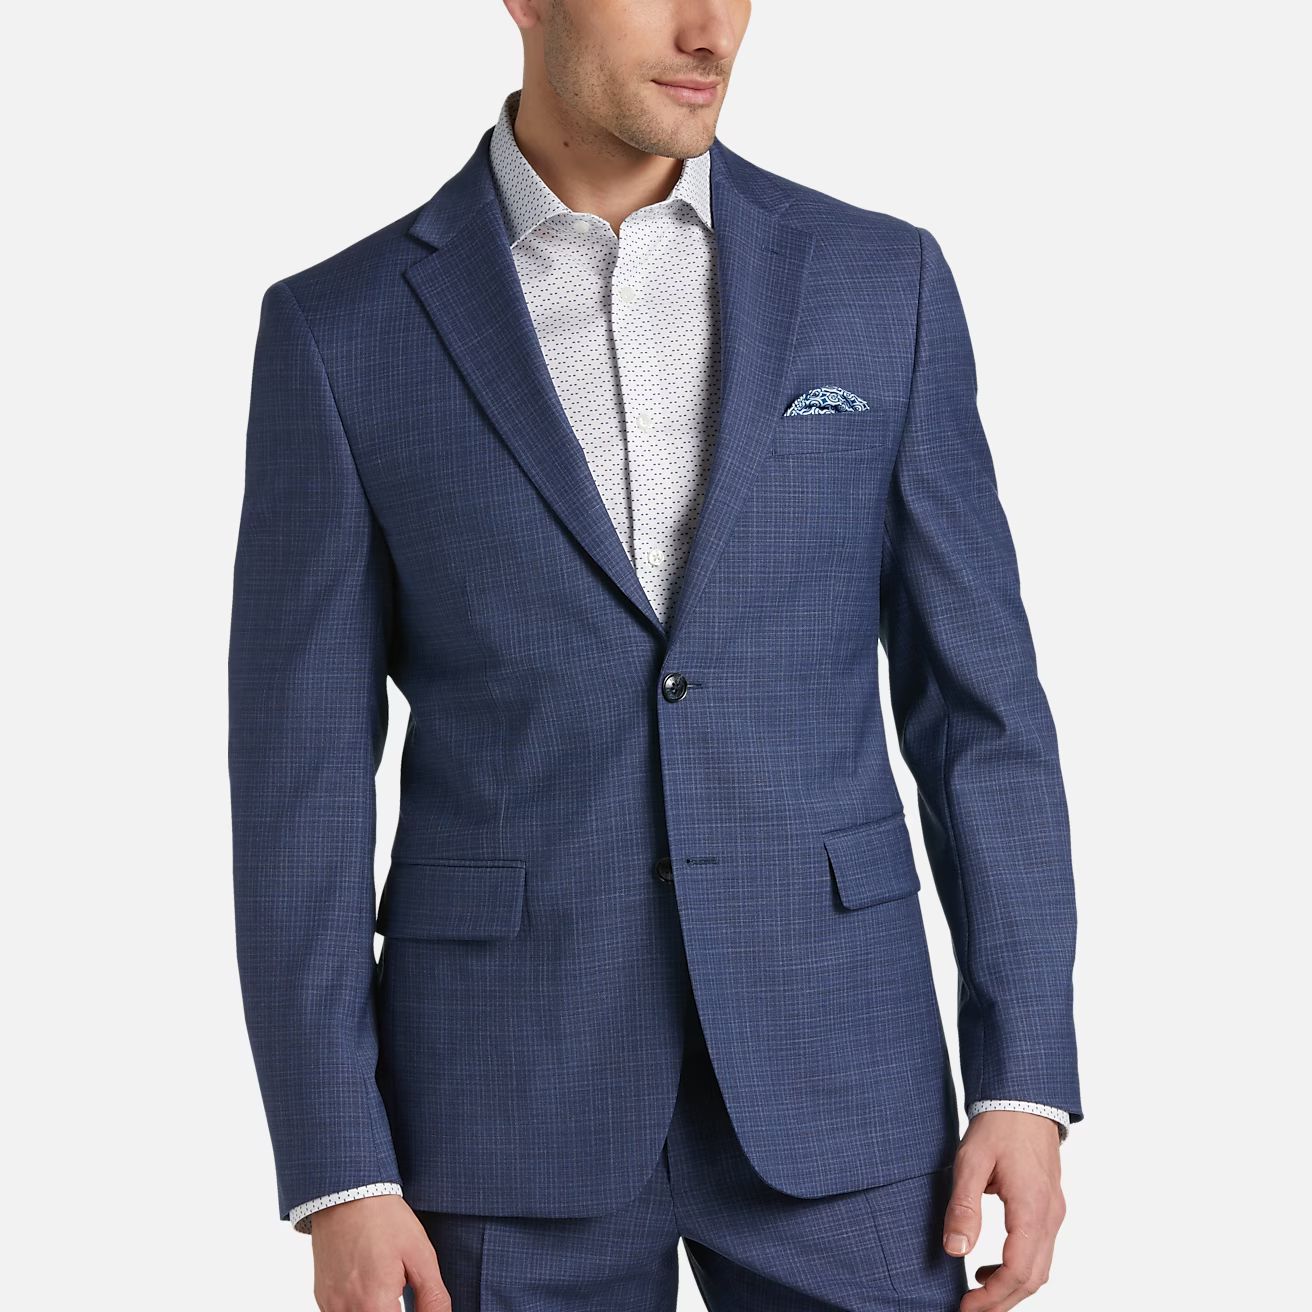 Tommy Hilfiger Modern Fit Suit Separates Jacket | All Clearance $39.99| Men's Wearhouse | The Men's Wearhouse